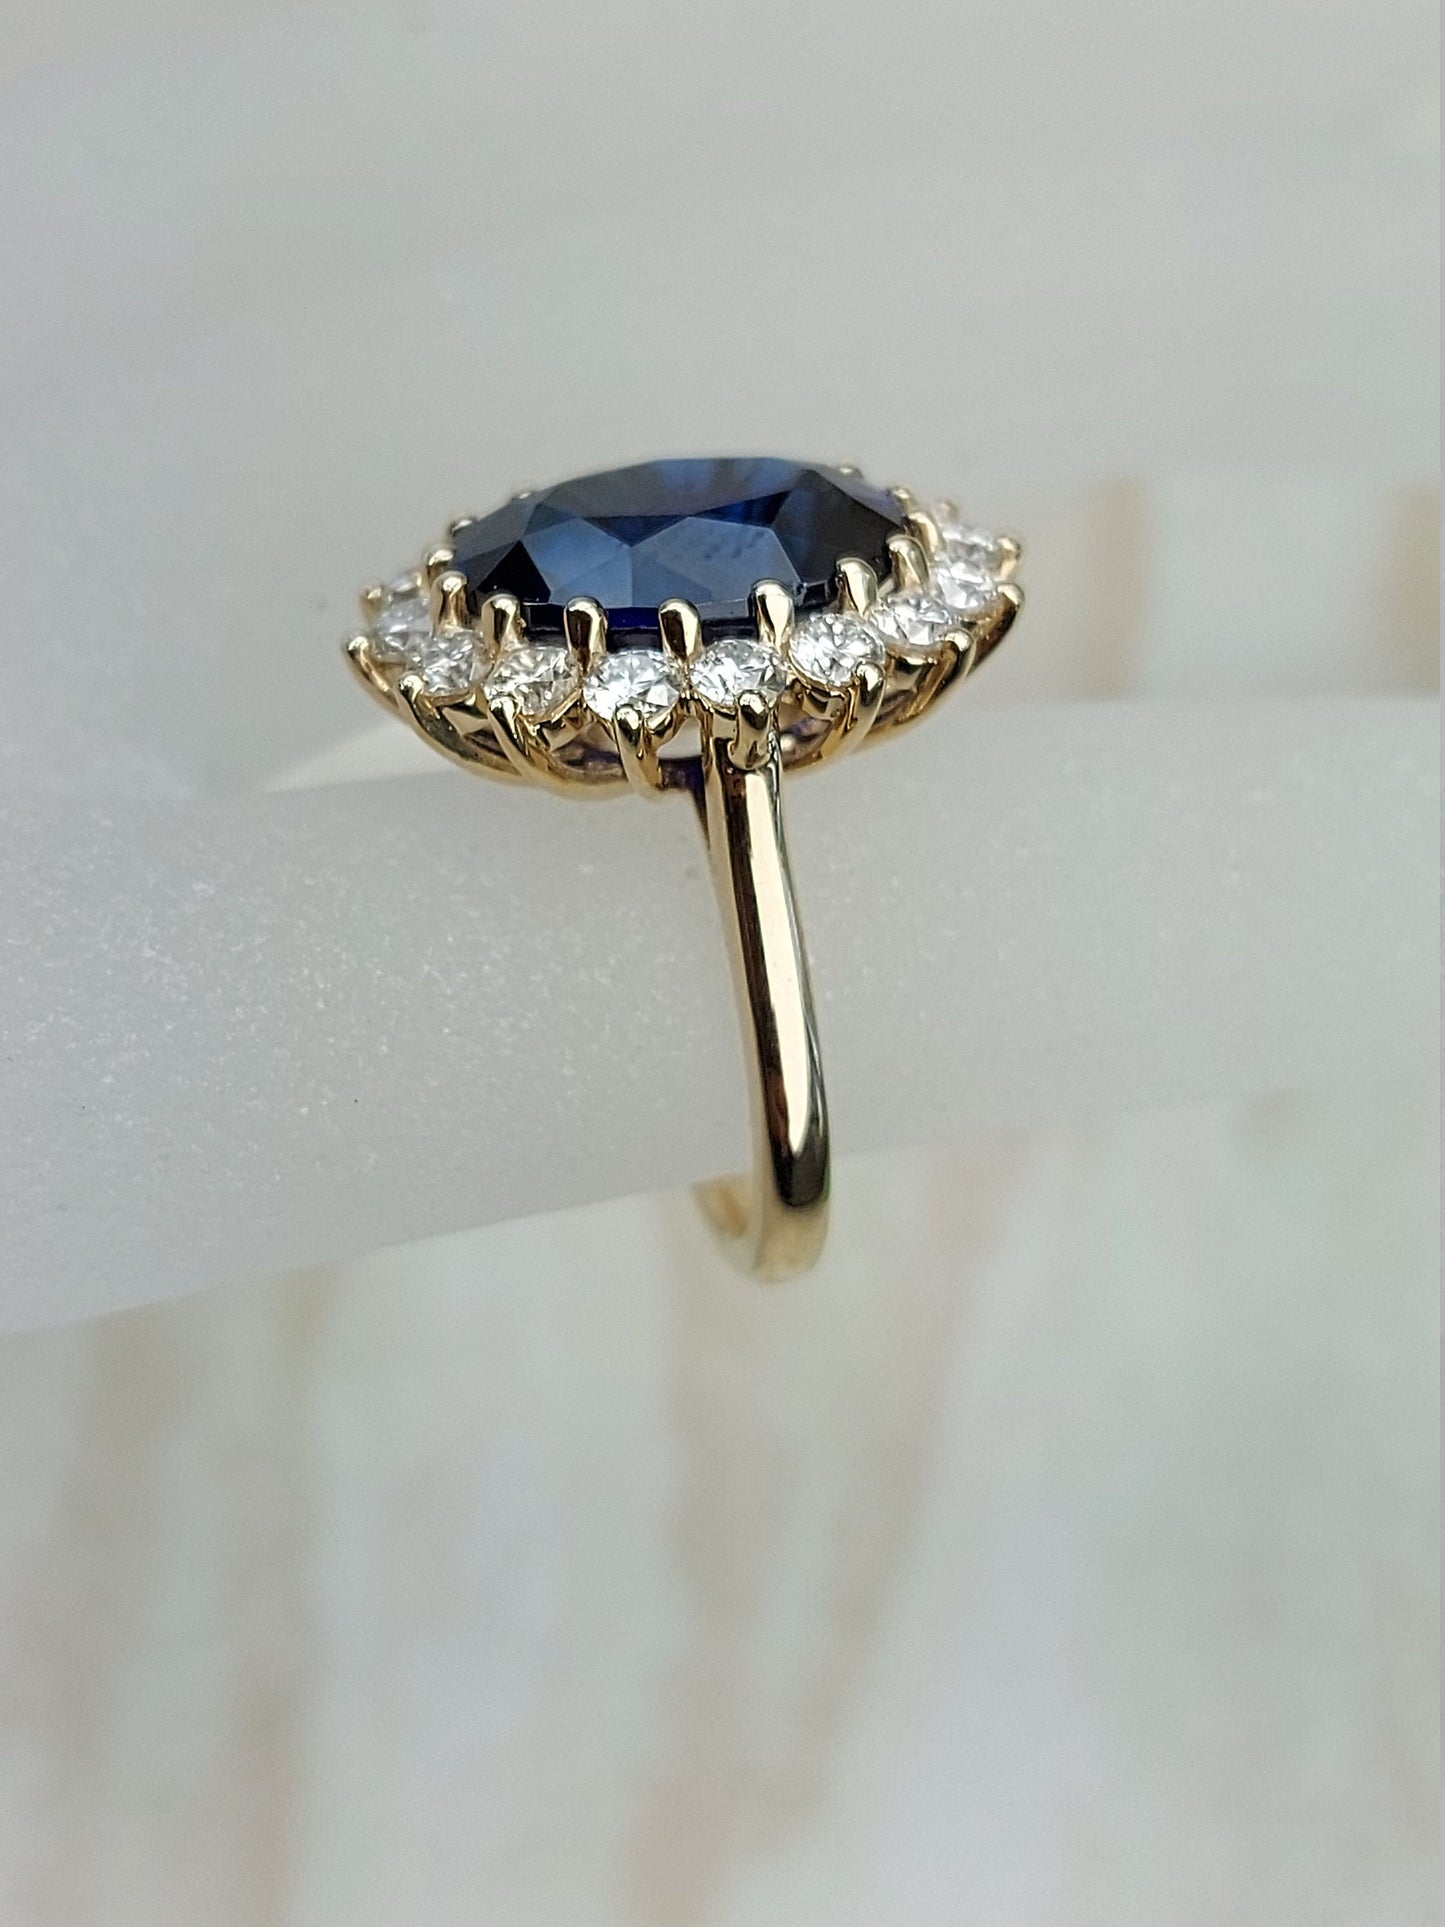 Princess Diana Natural Certified Blue Sapphire Engagement Ring, Oval cut 14k yellow gold diamond ring, 6 Ct Blue sapphire ring.